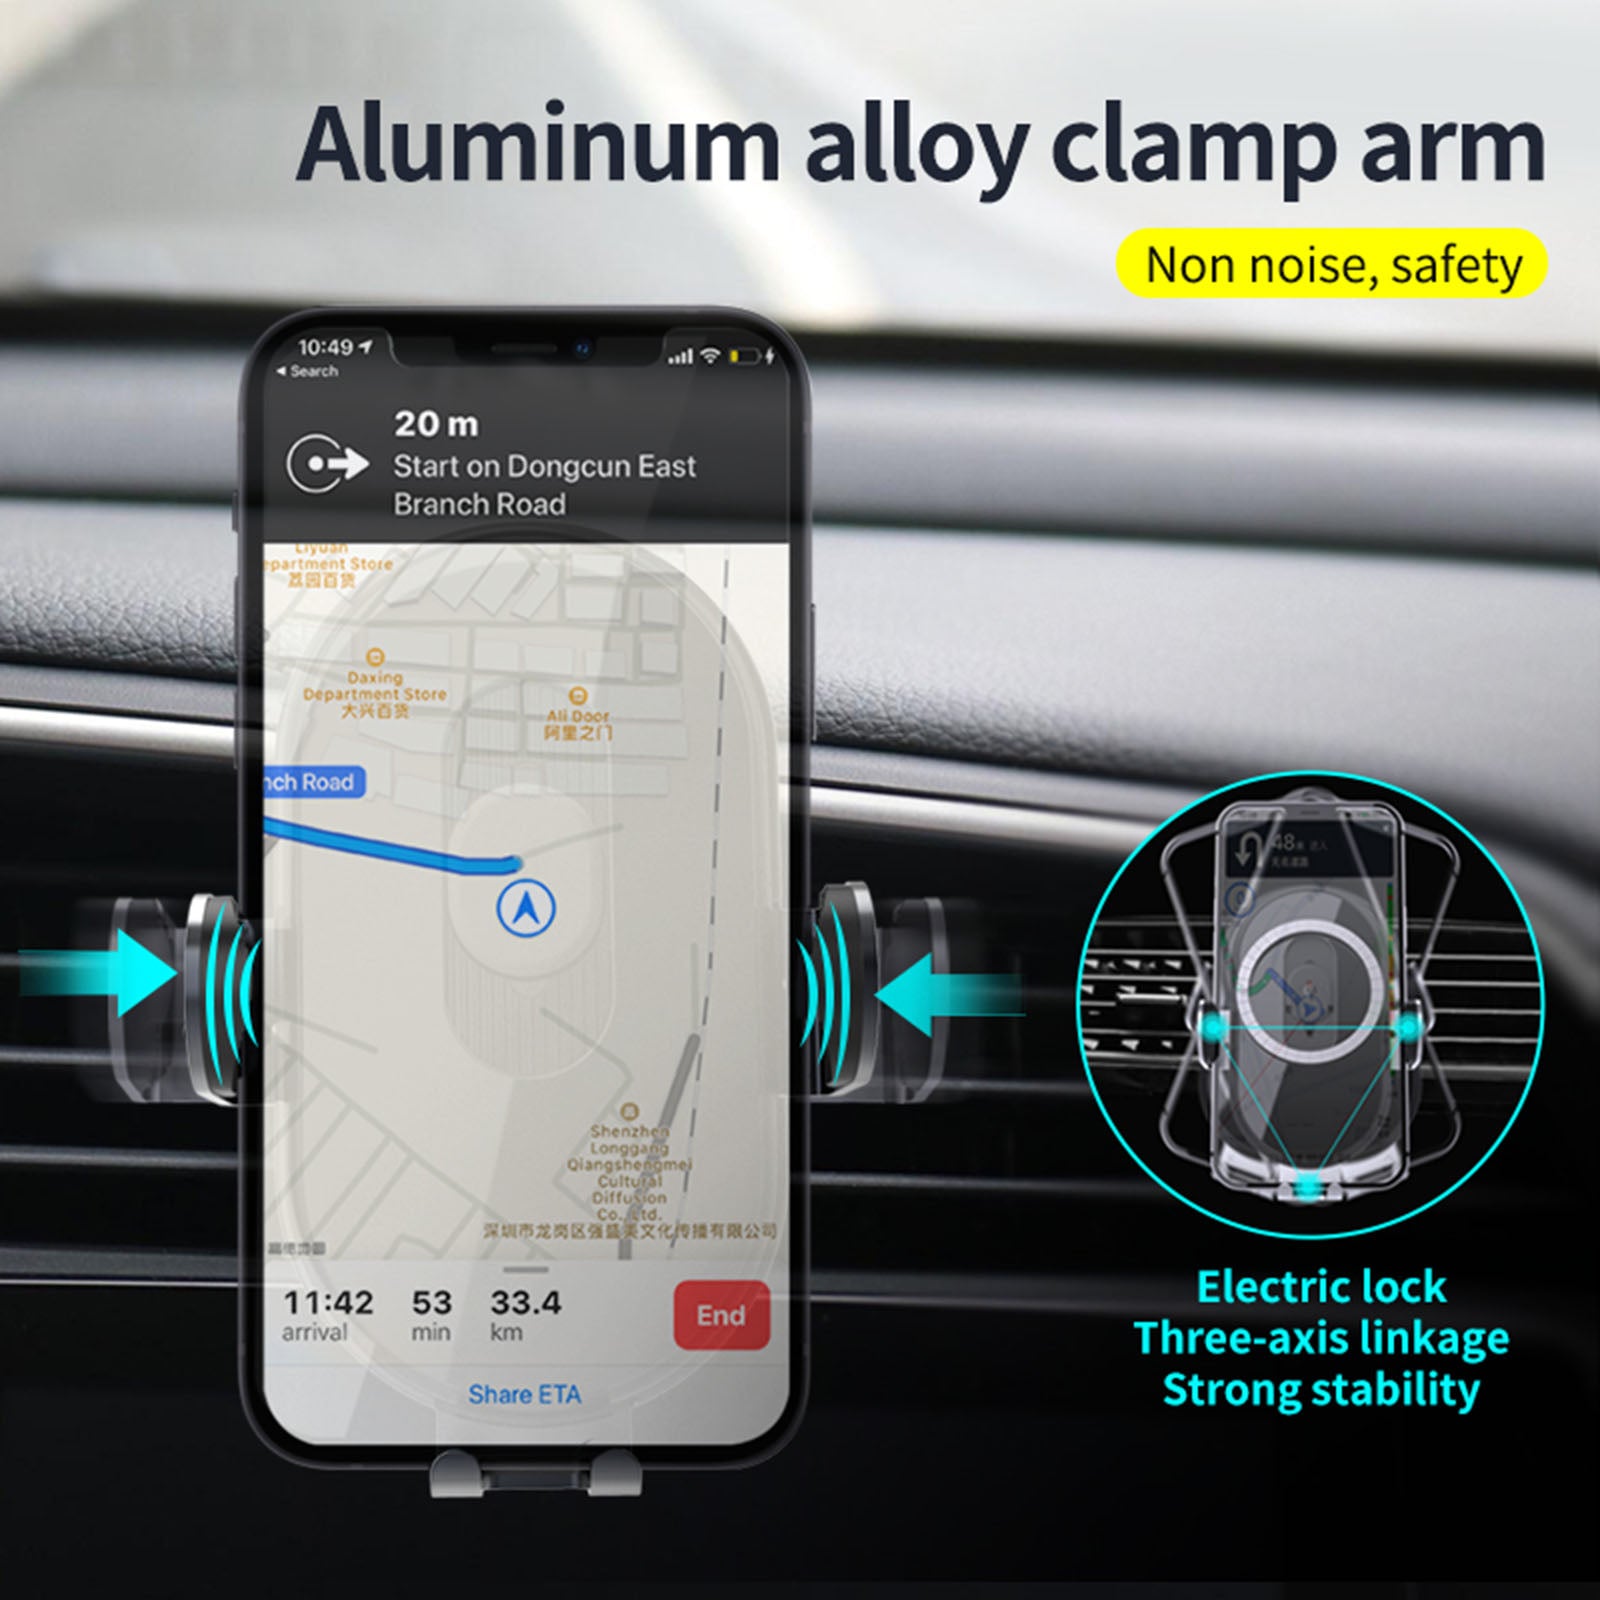 Auto-Clamping Qi Car Wireless Charger 10W/7.5W/5W Air Vent Dashboard Car Mount Compatible/w iPhone 12 Series/X/XR/11/8, Galaxy Note10/S10/S20 Series